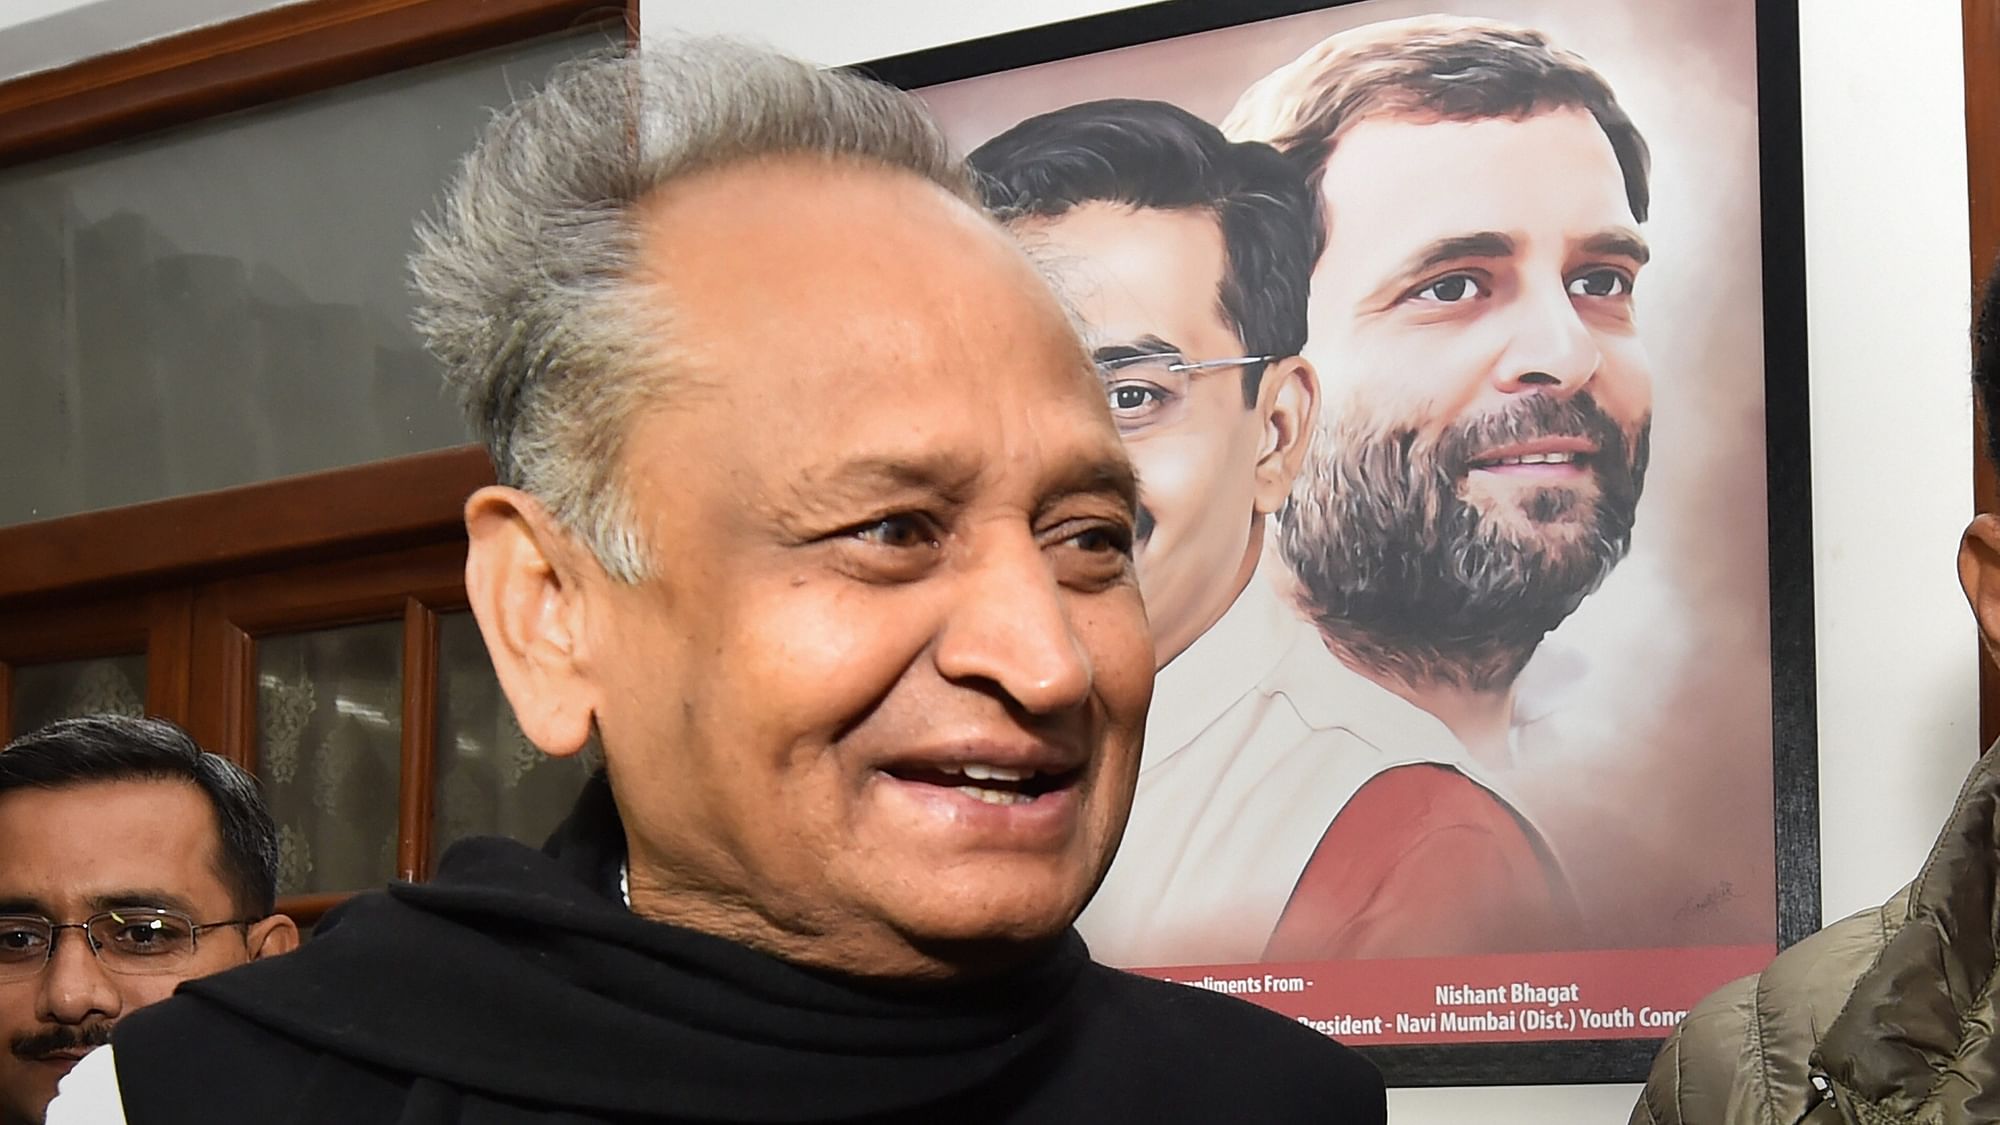 Rajasthan Chief Minister Ashok Gehlot has written to President Ram Nath Kovind, asking him to intervene and ensure that an Assembly session can be held immediately.